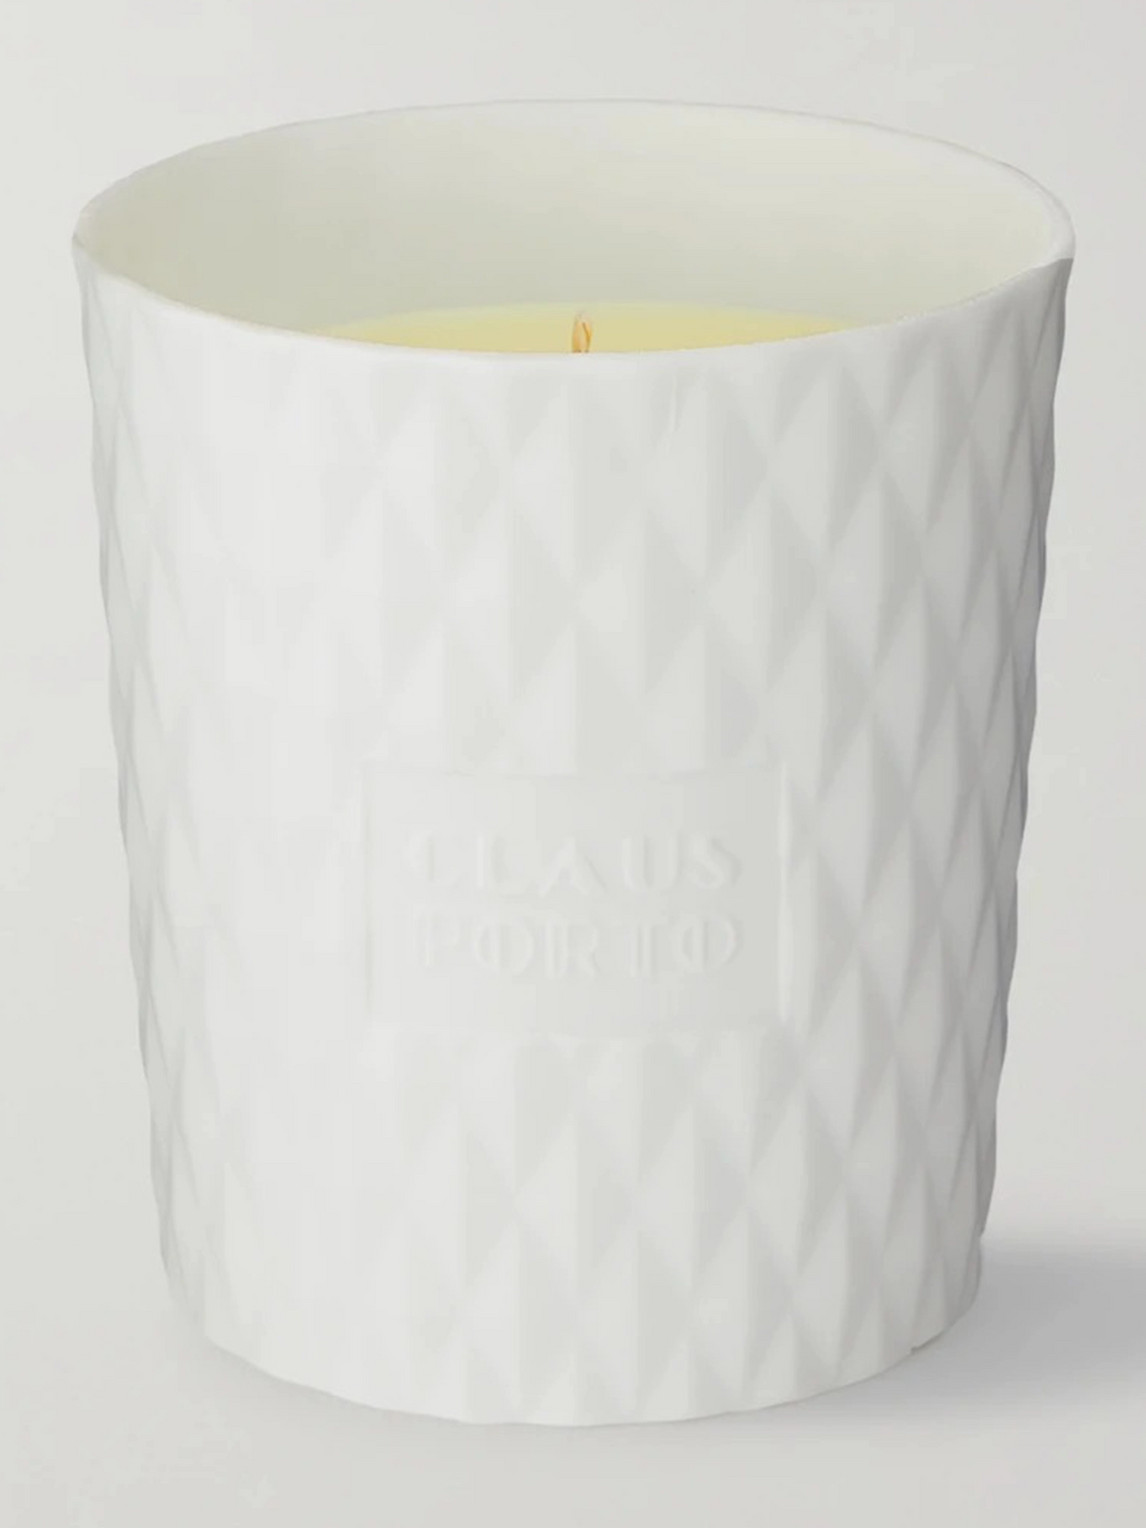 Claus Porto Voga Scented Candle In Colorless